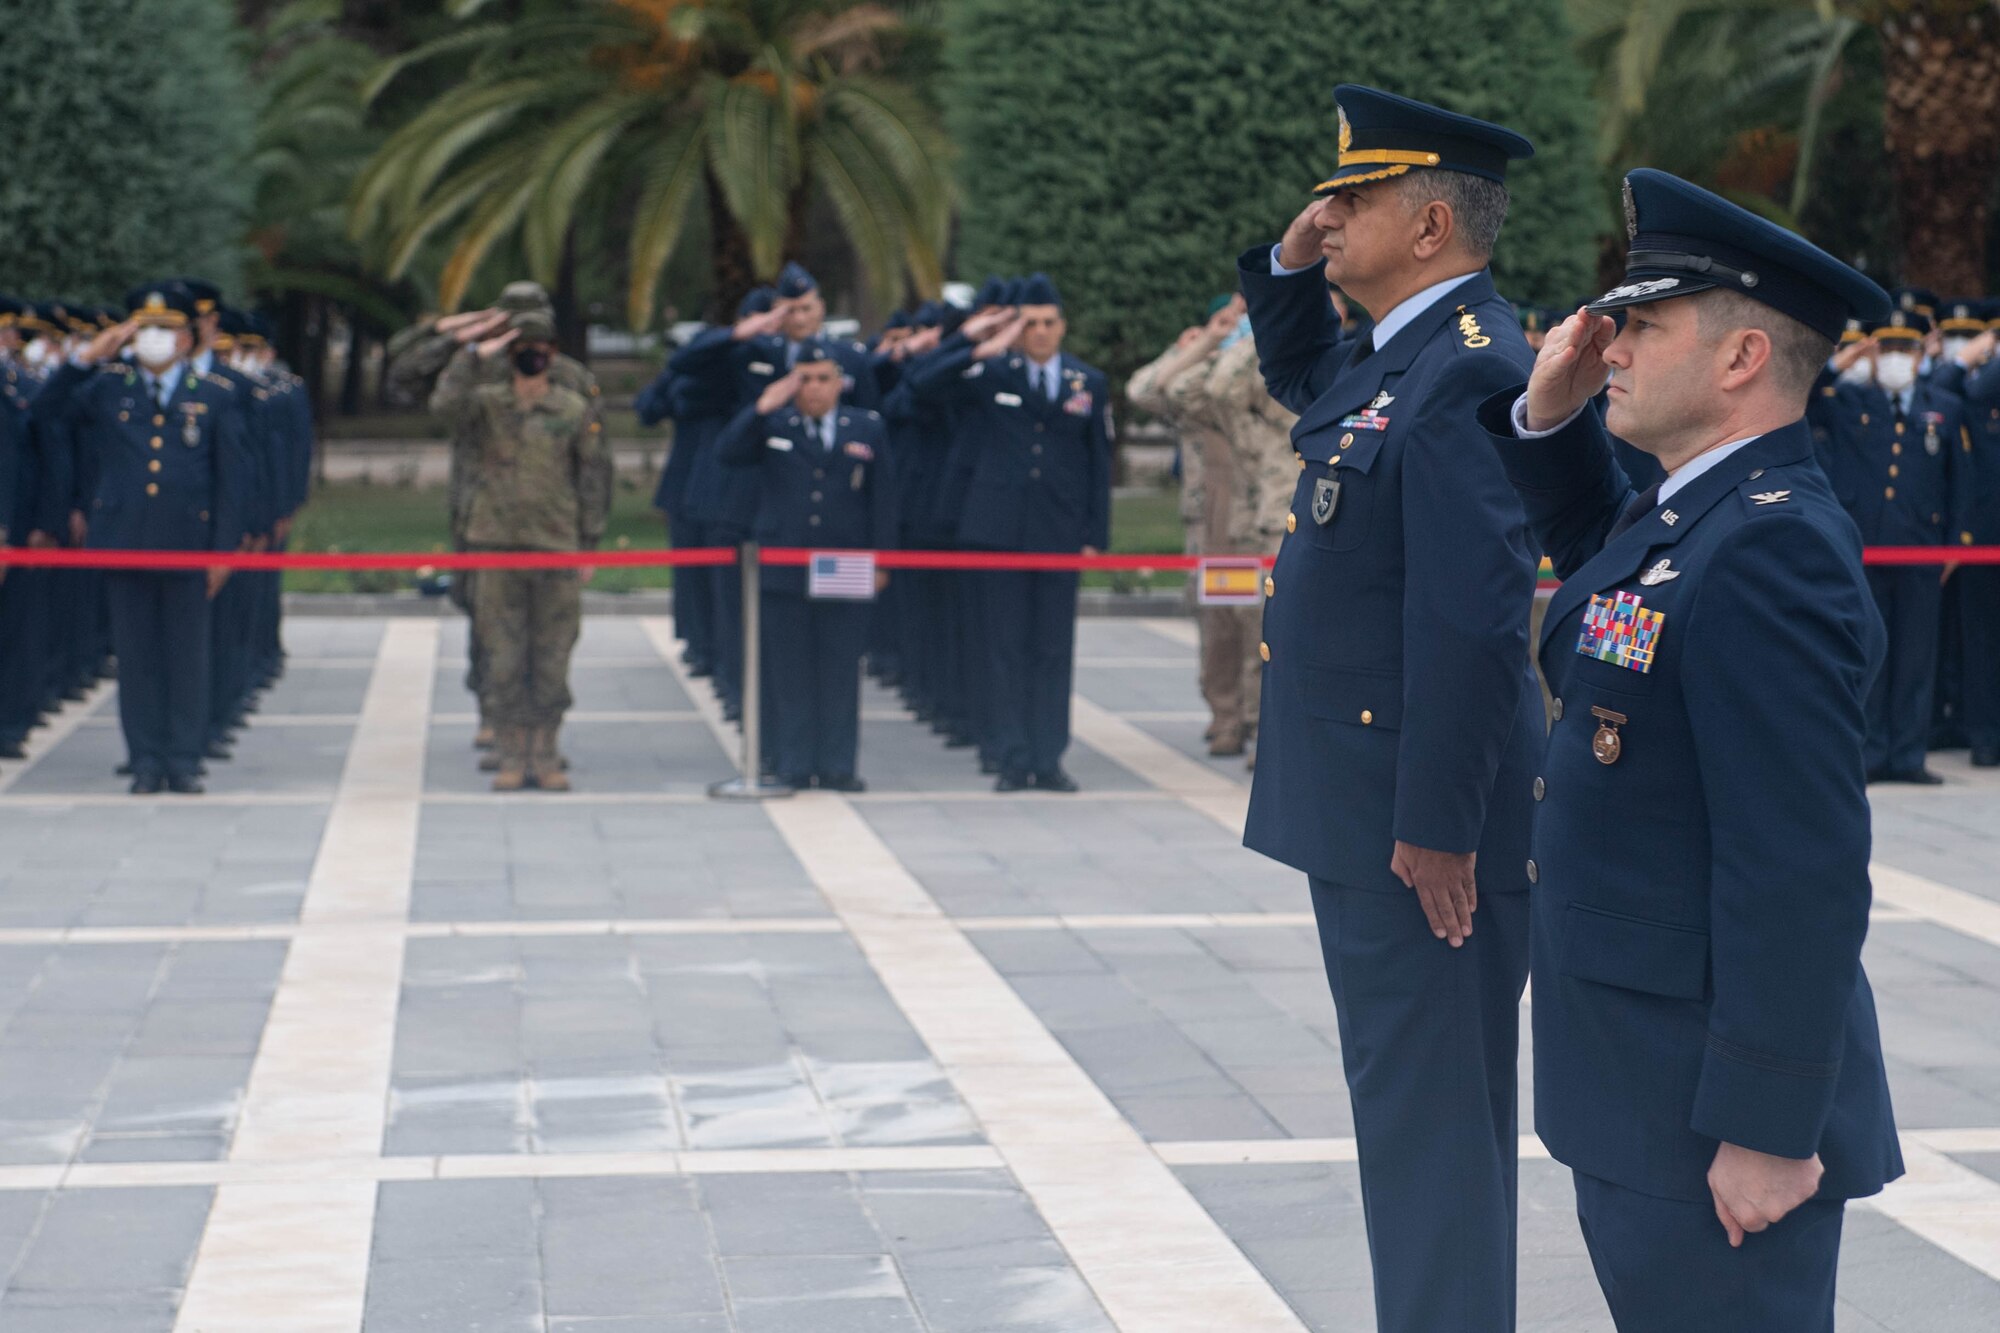 U.S. Air Force and Turkish Air Force leadership salute during Atatürk Memorial Day ceremony